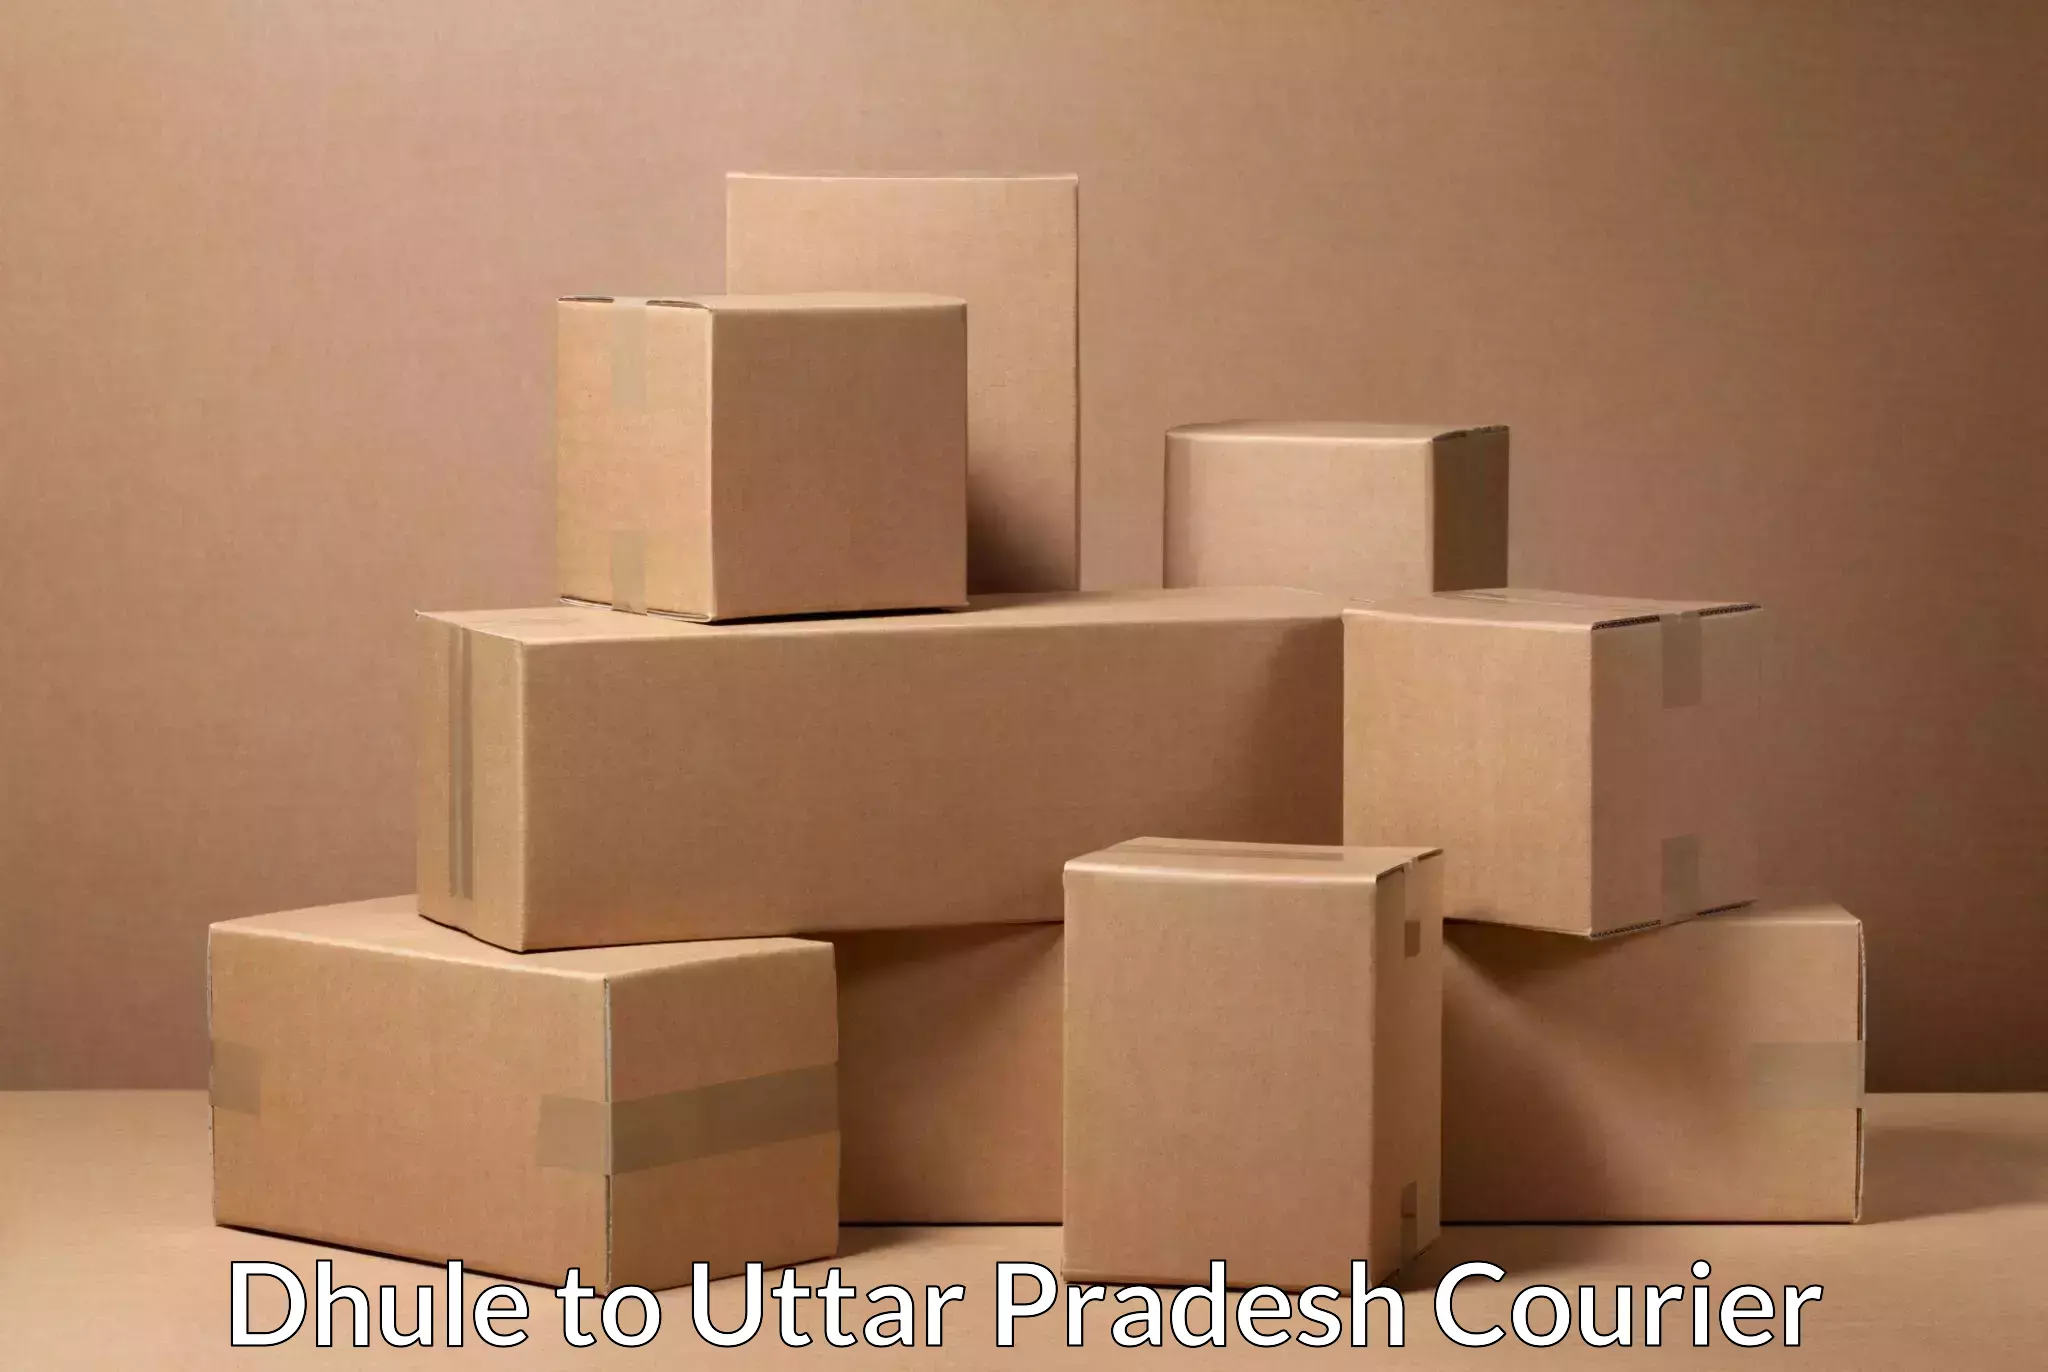 Express delivery capabilities Dhule to Lucknow